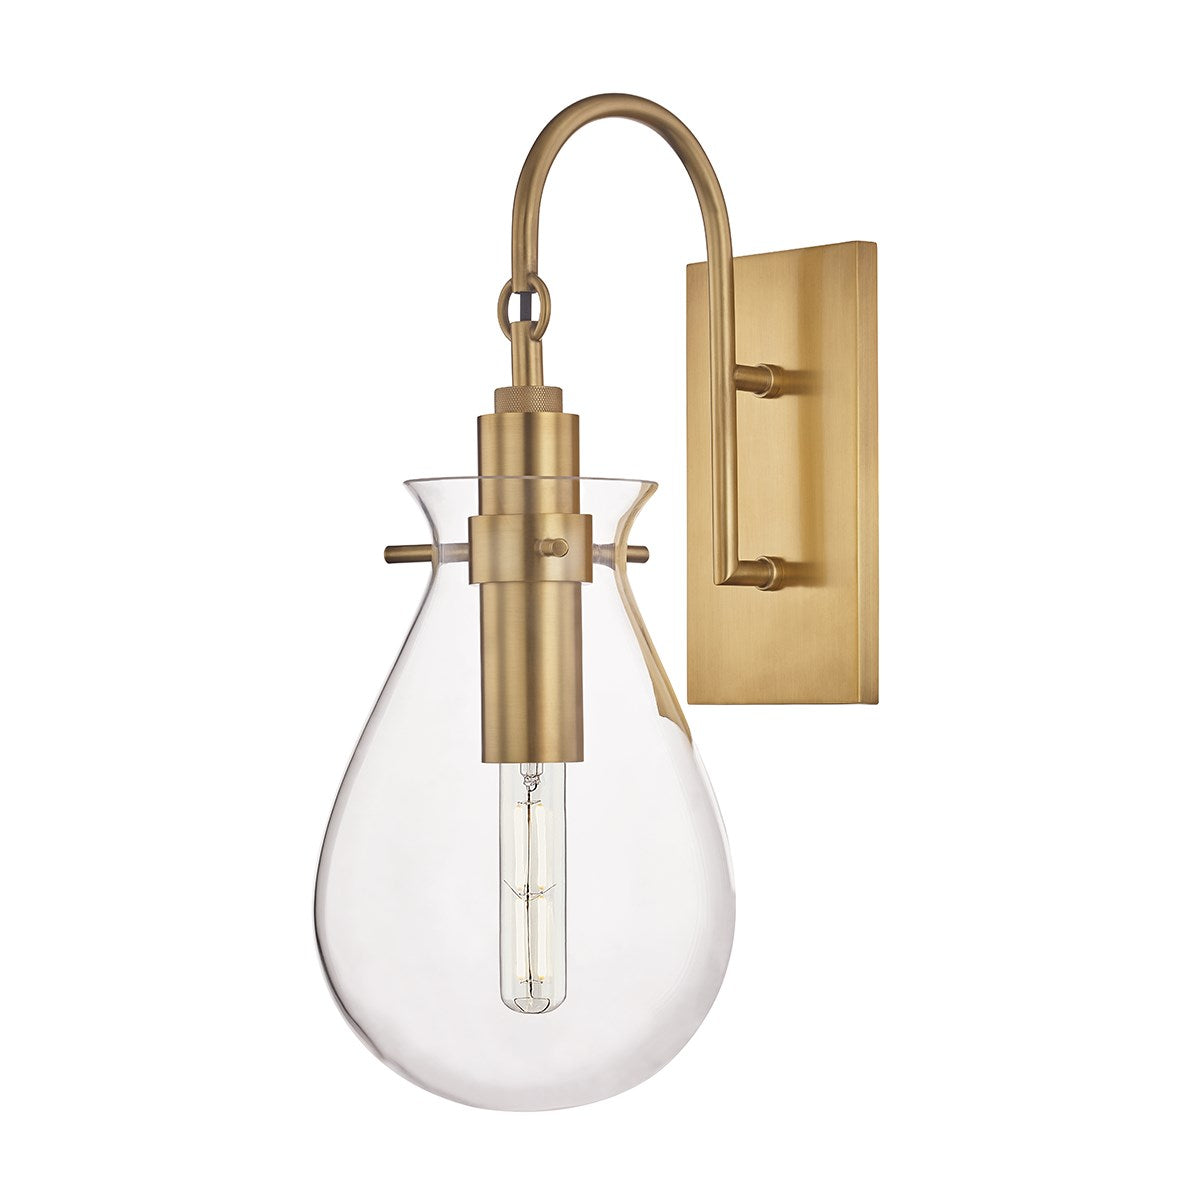 Ivy - 1 LIGHT WALL SCONCE